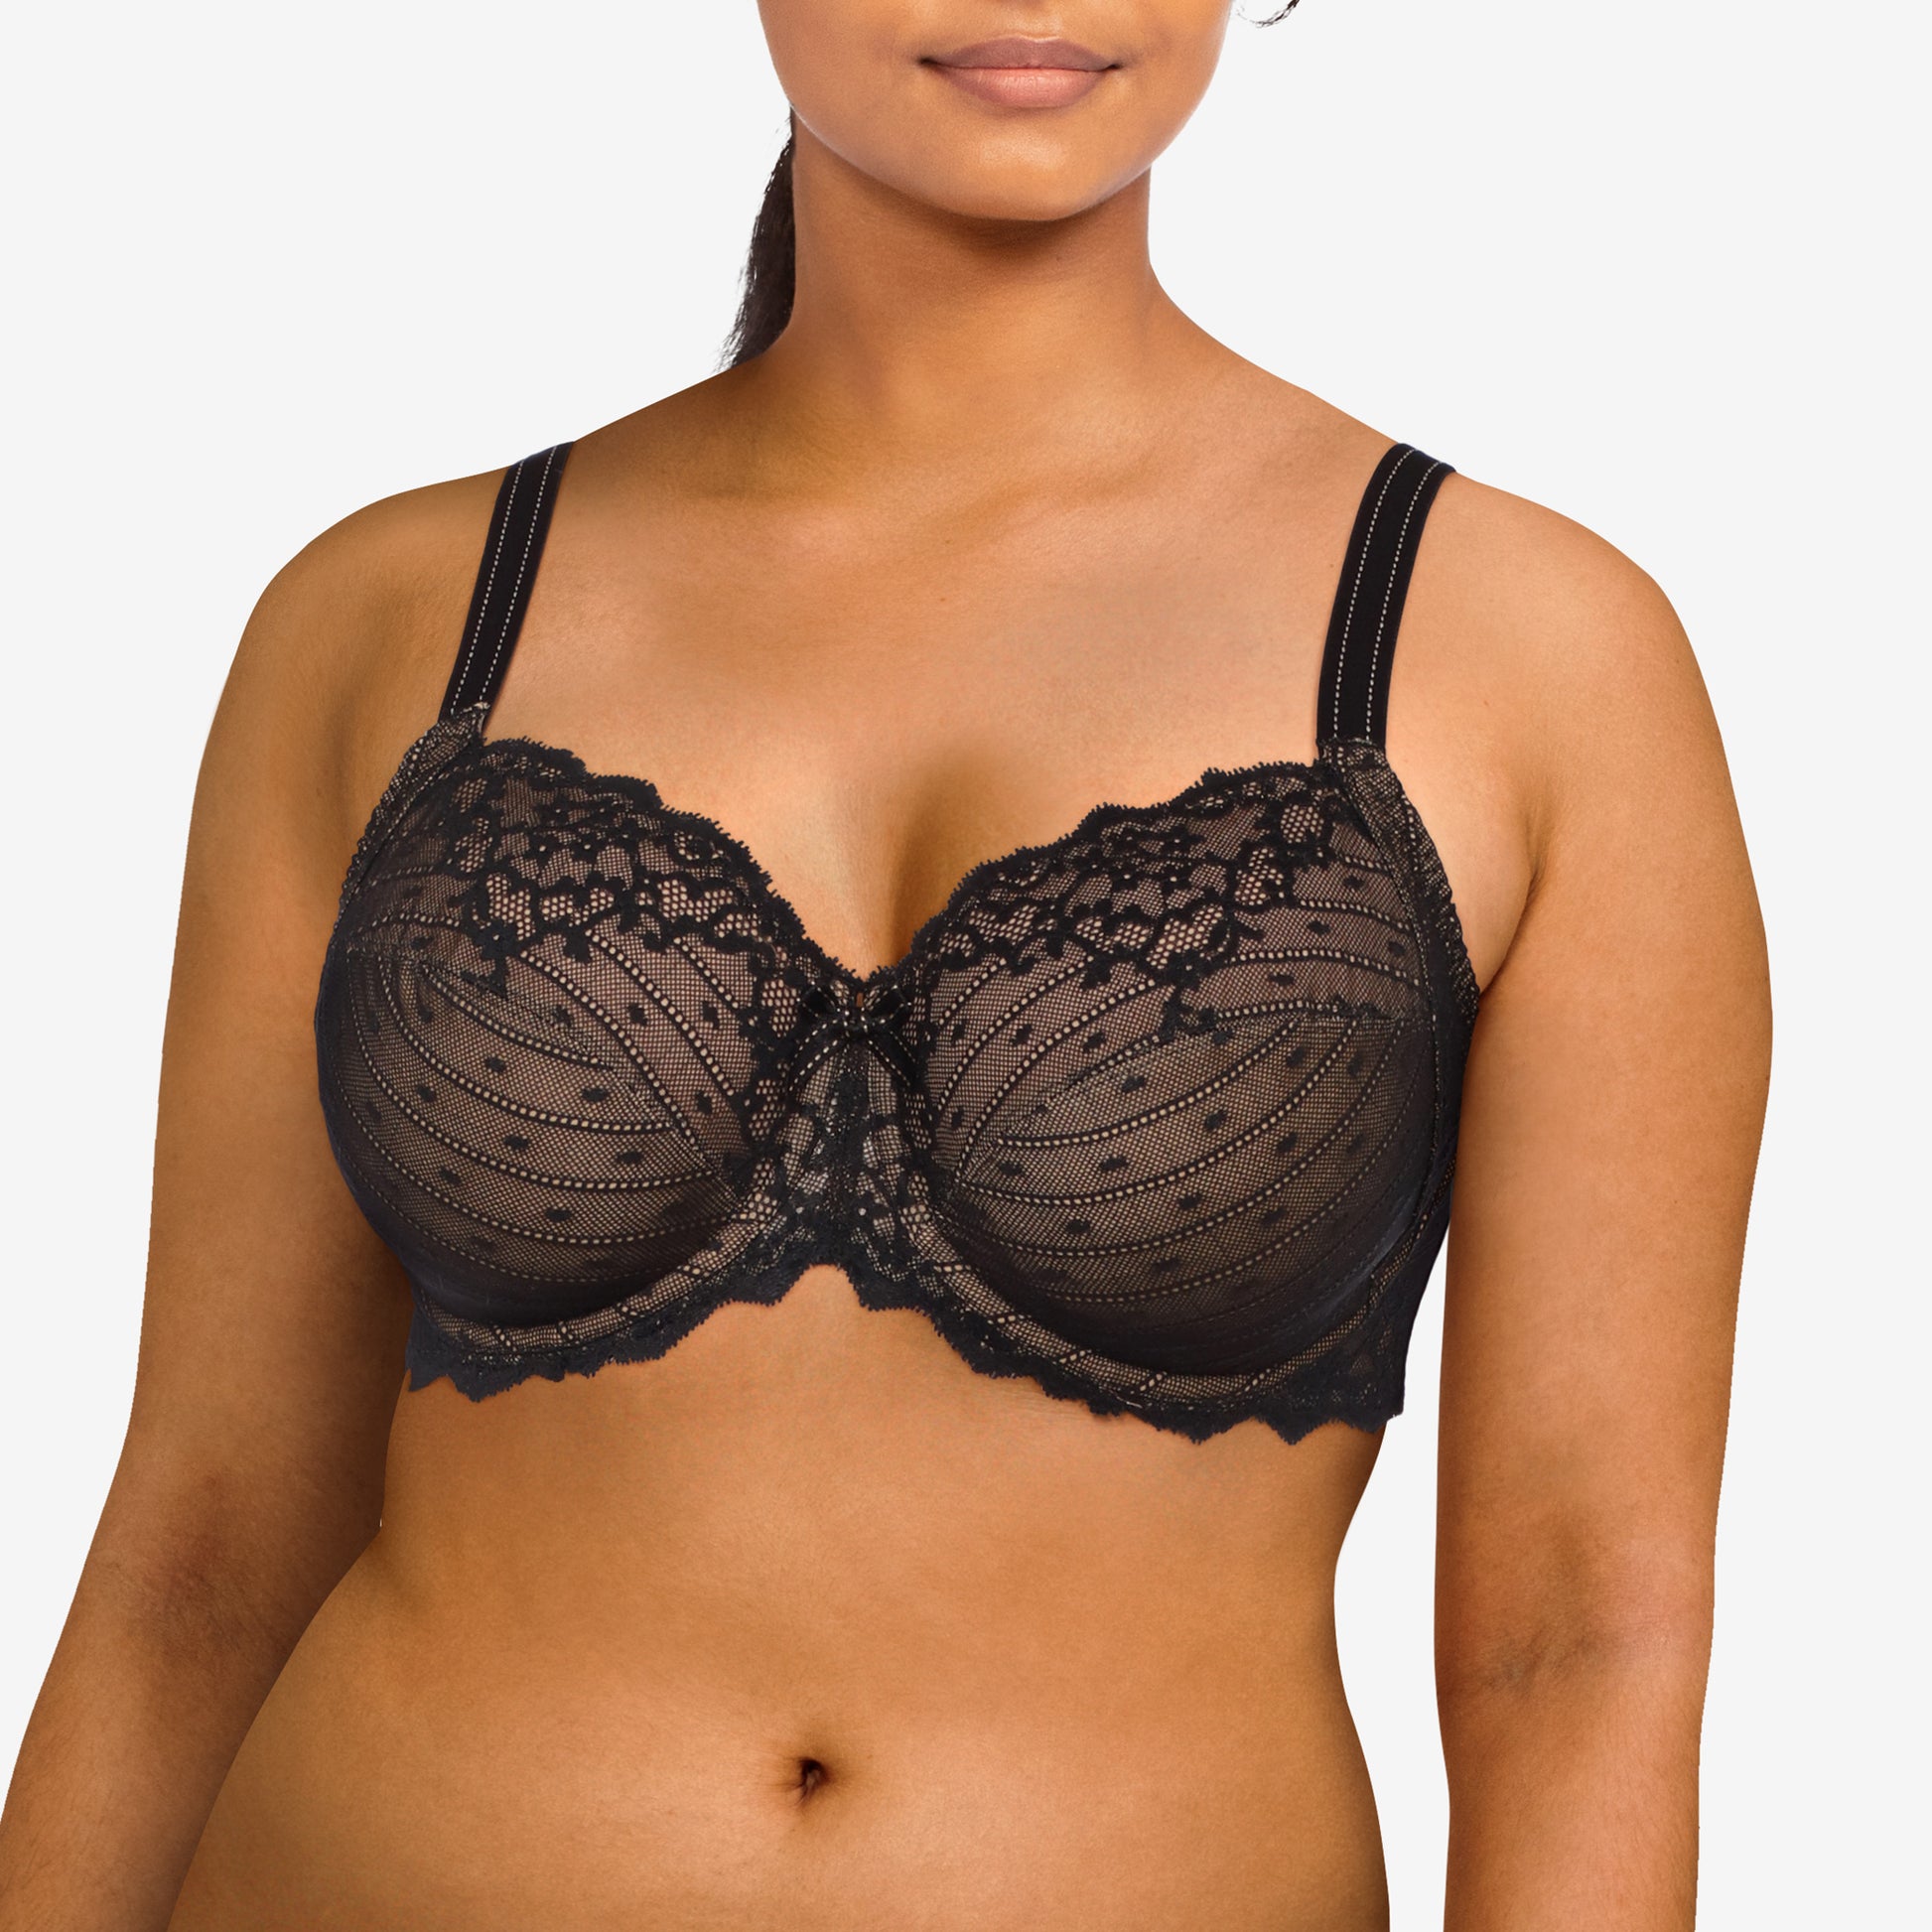 Chantelle Rive Gauche Bra 3281  Forever Yours Lingerie in Canada